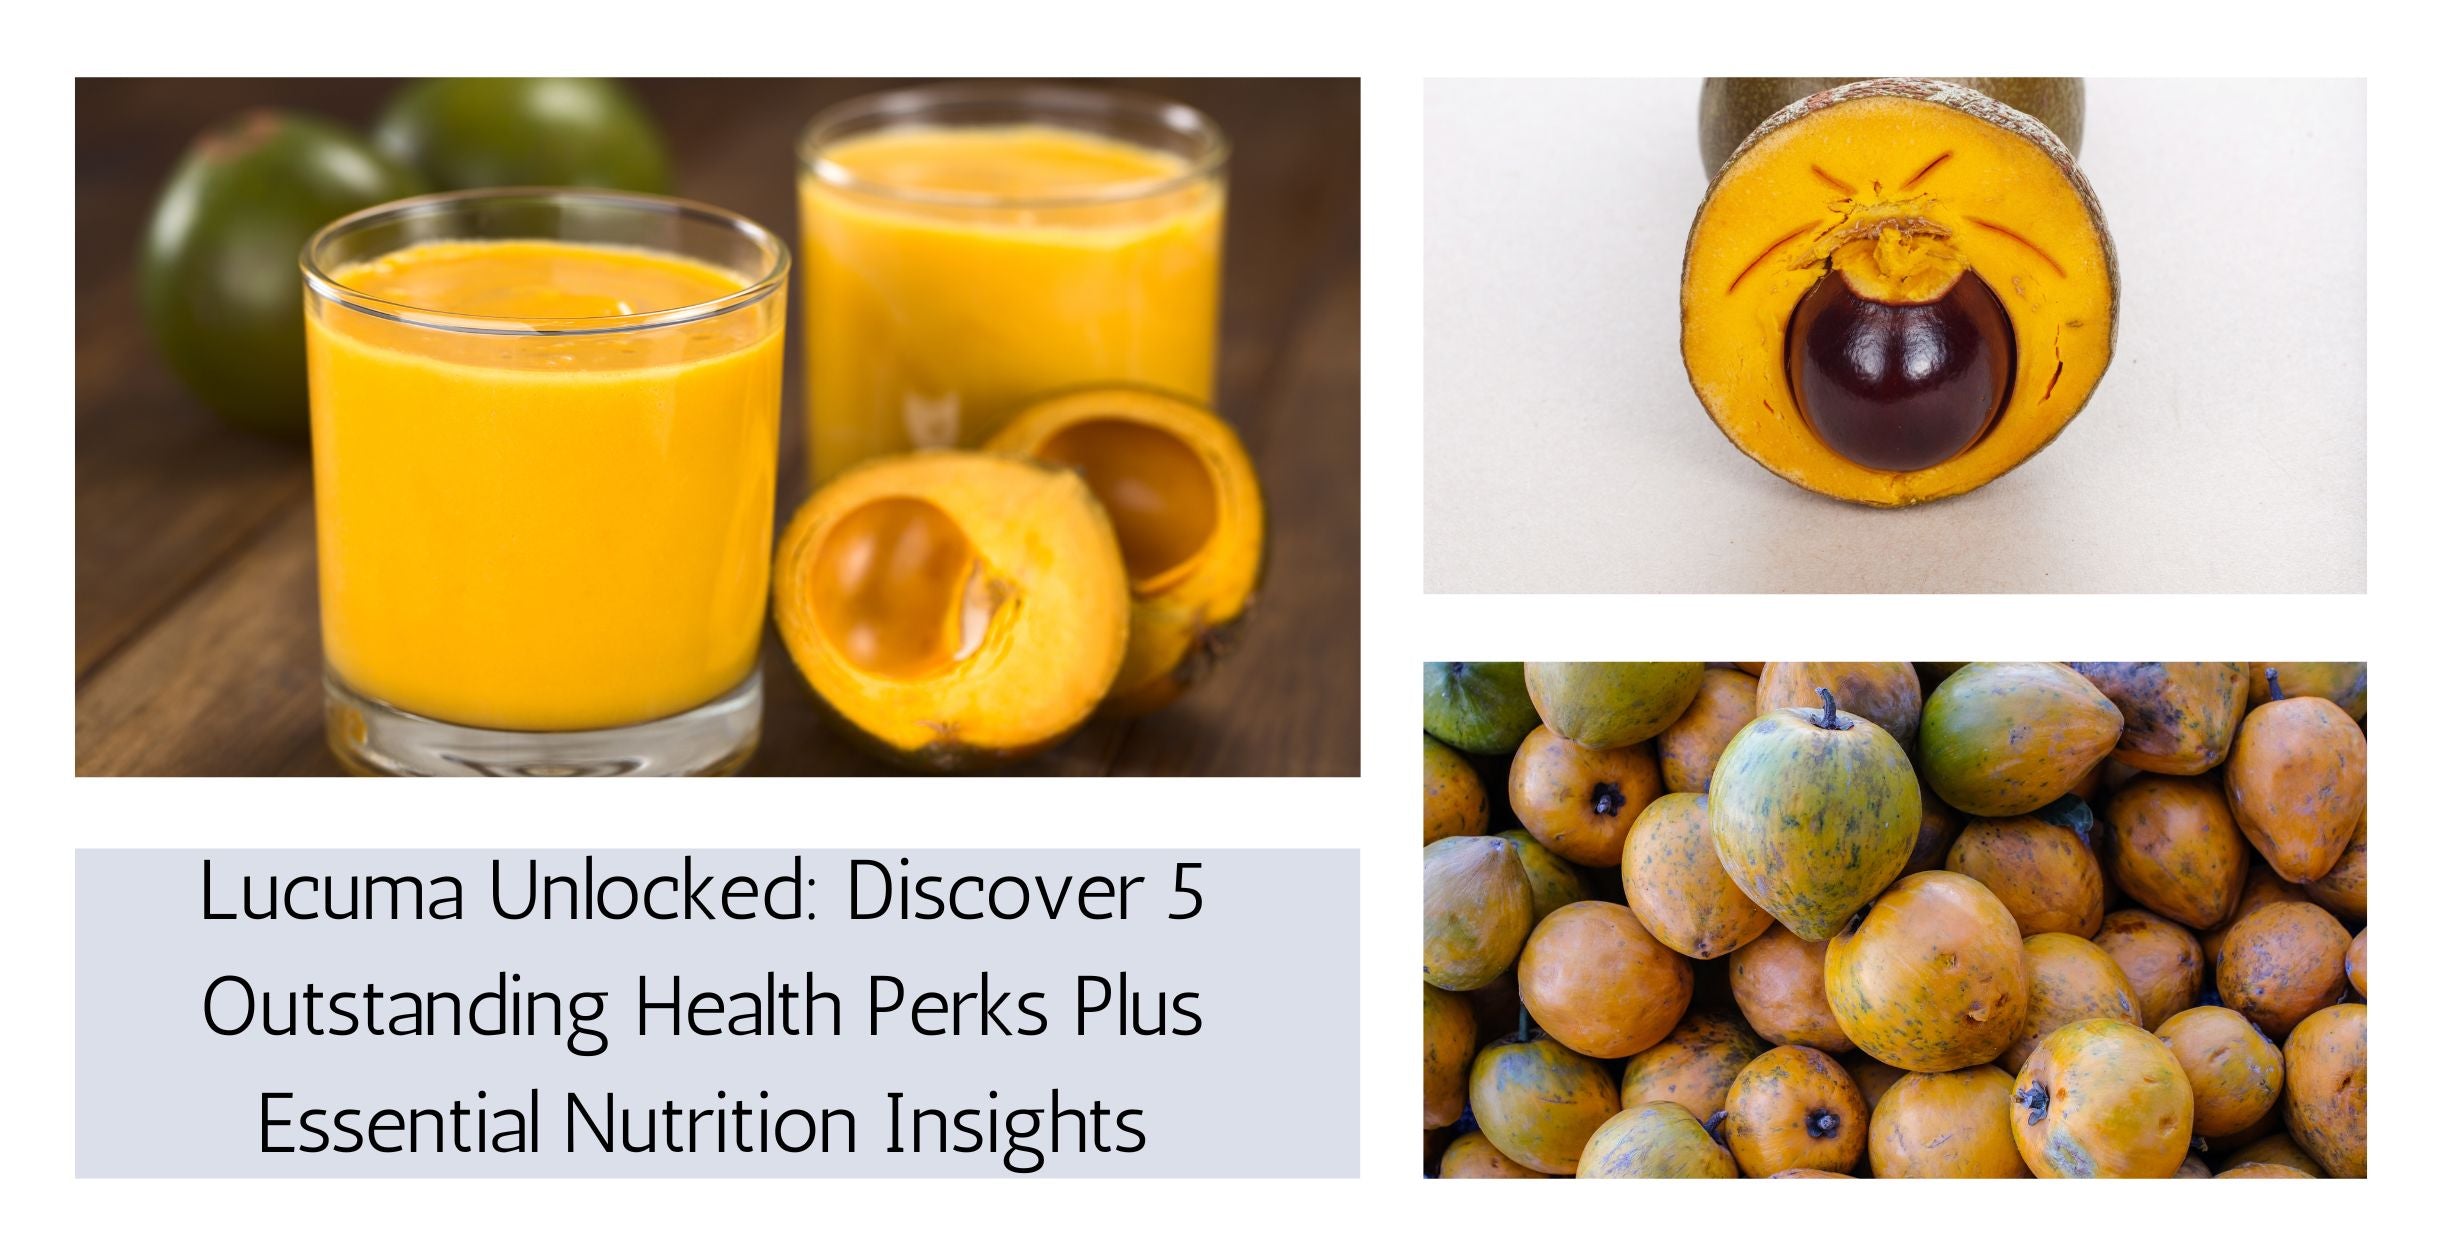 Lucuma Unlocked: Discover 5 Outstanding Health Perks Plus Essential Nutrition Insights